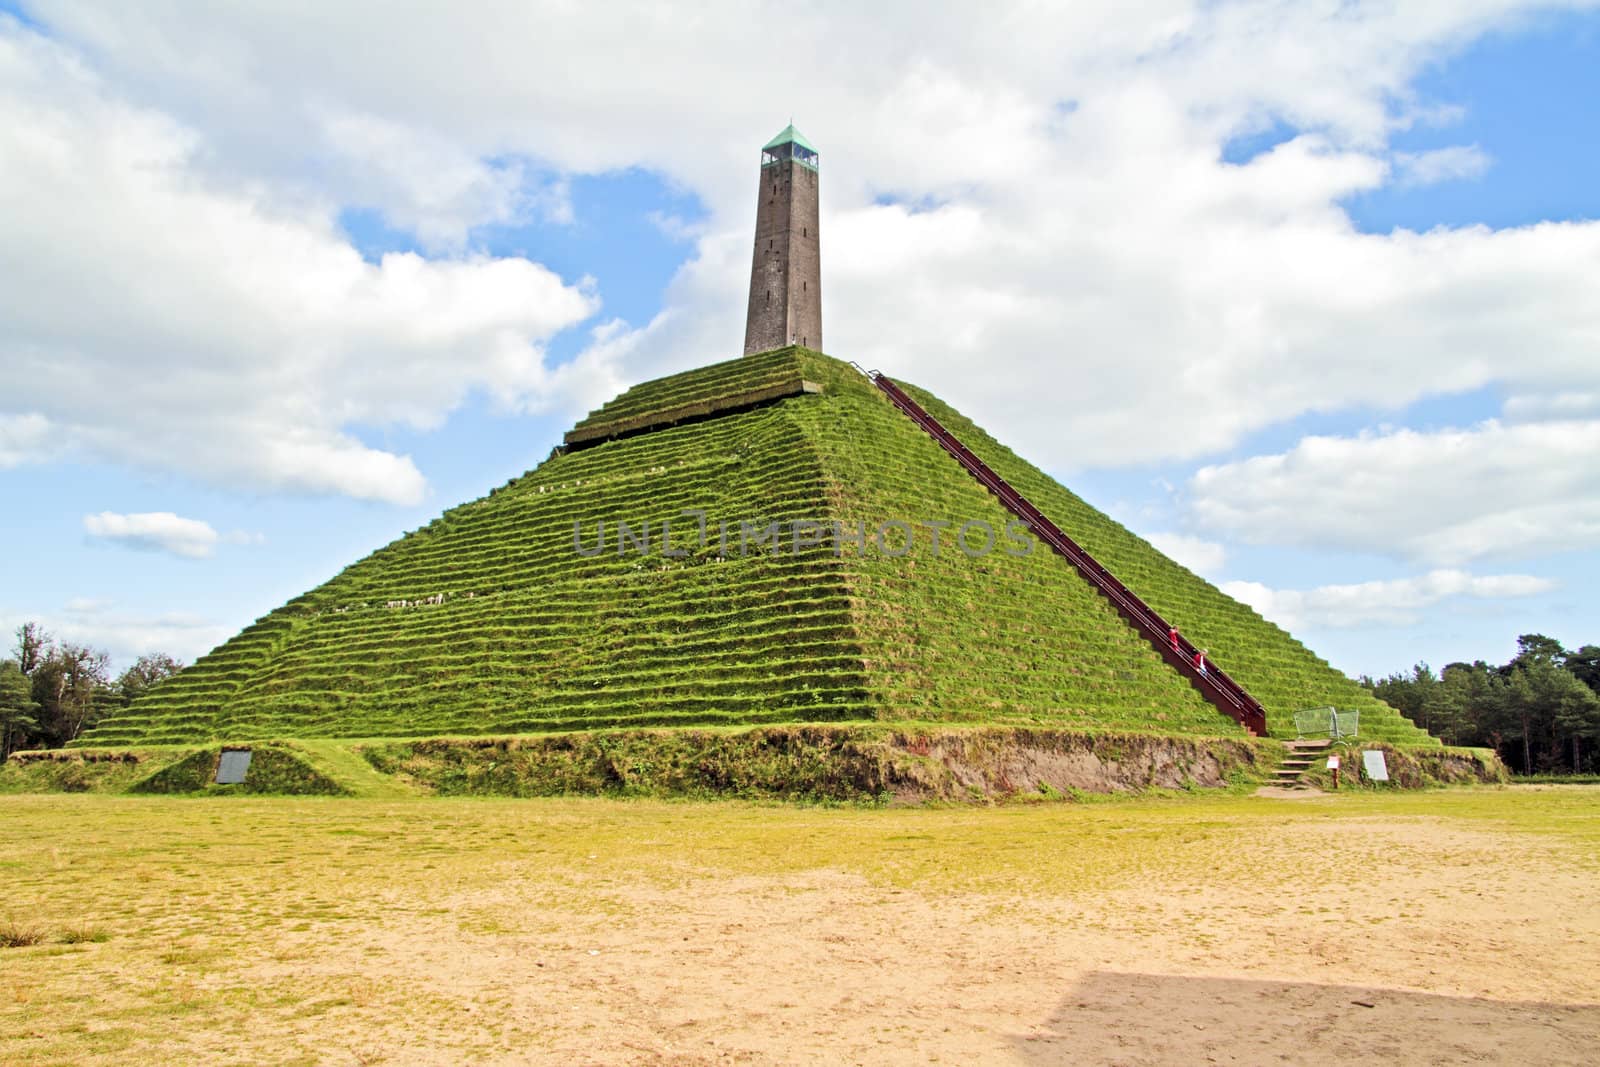  Pyramid from Austerlitz built in 1804 in the Netherlands by devy